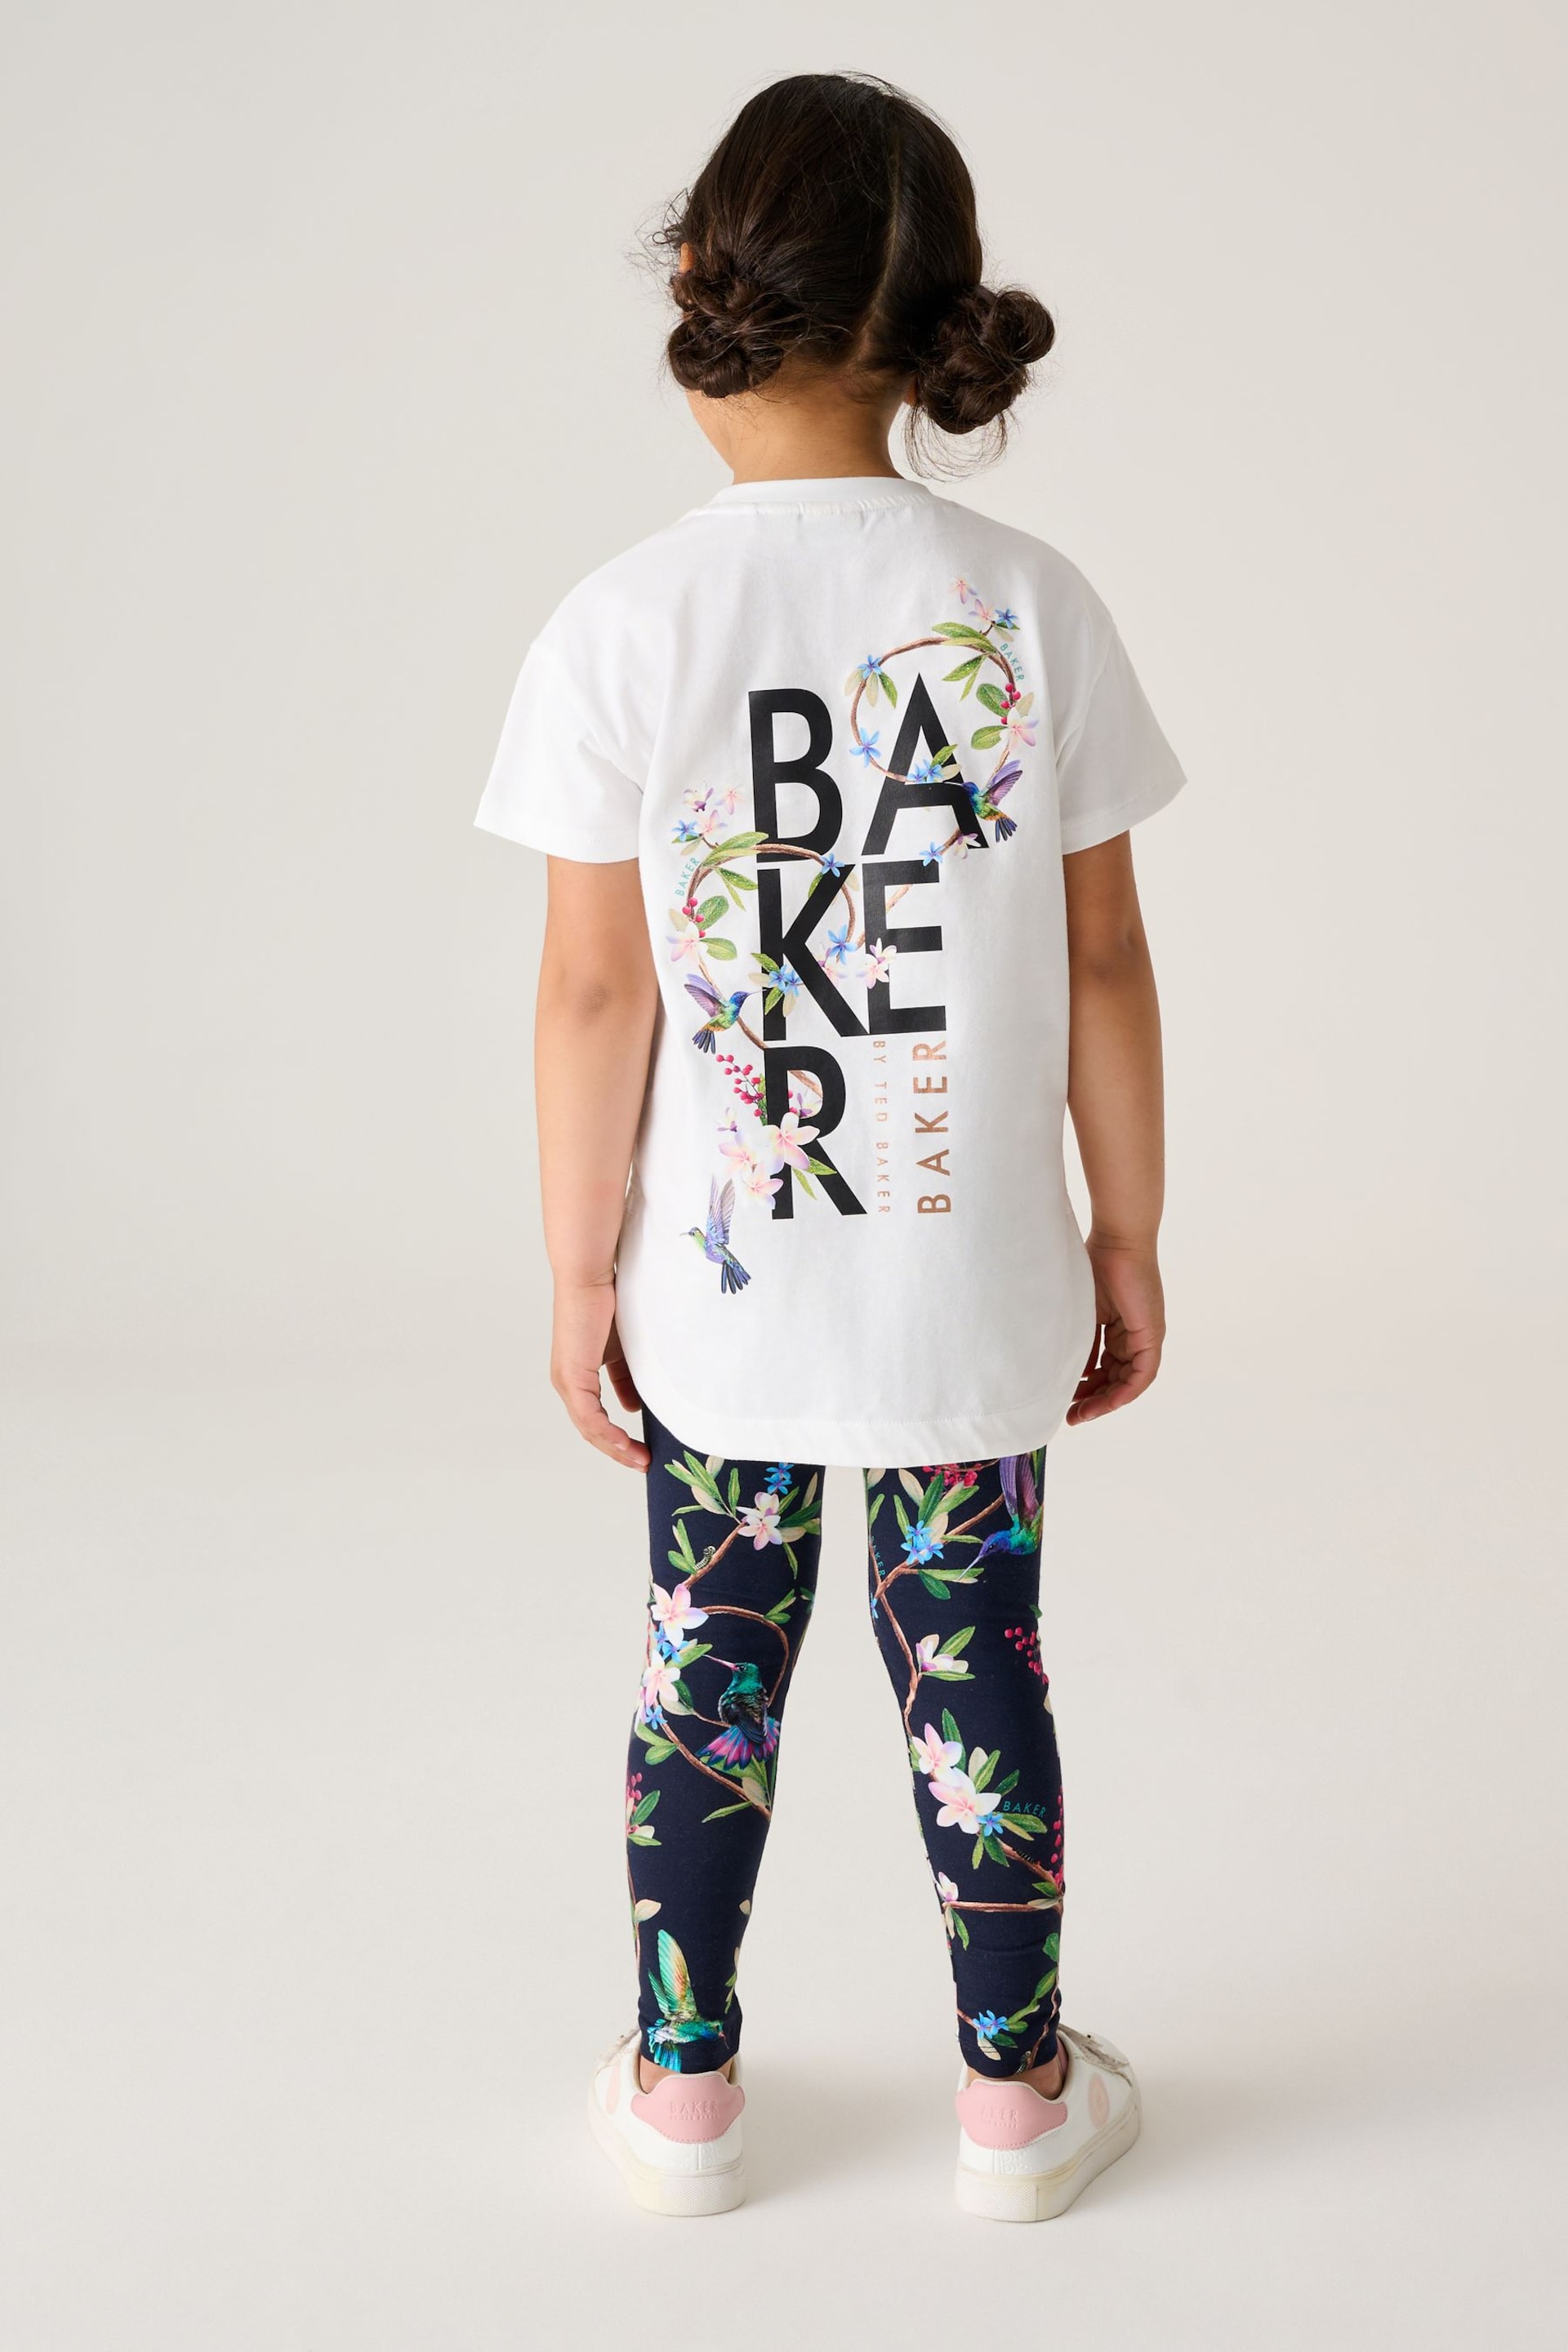 Baker by Ted Baker Navy Graphic T-Shirt and Legging Set - Image 3 of 11